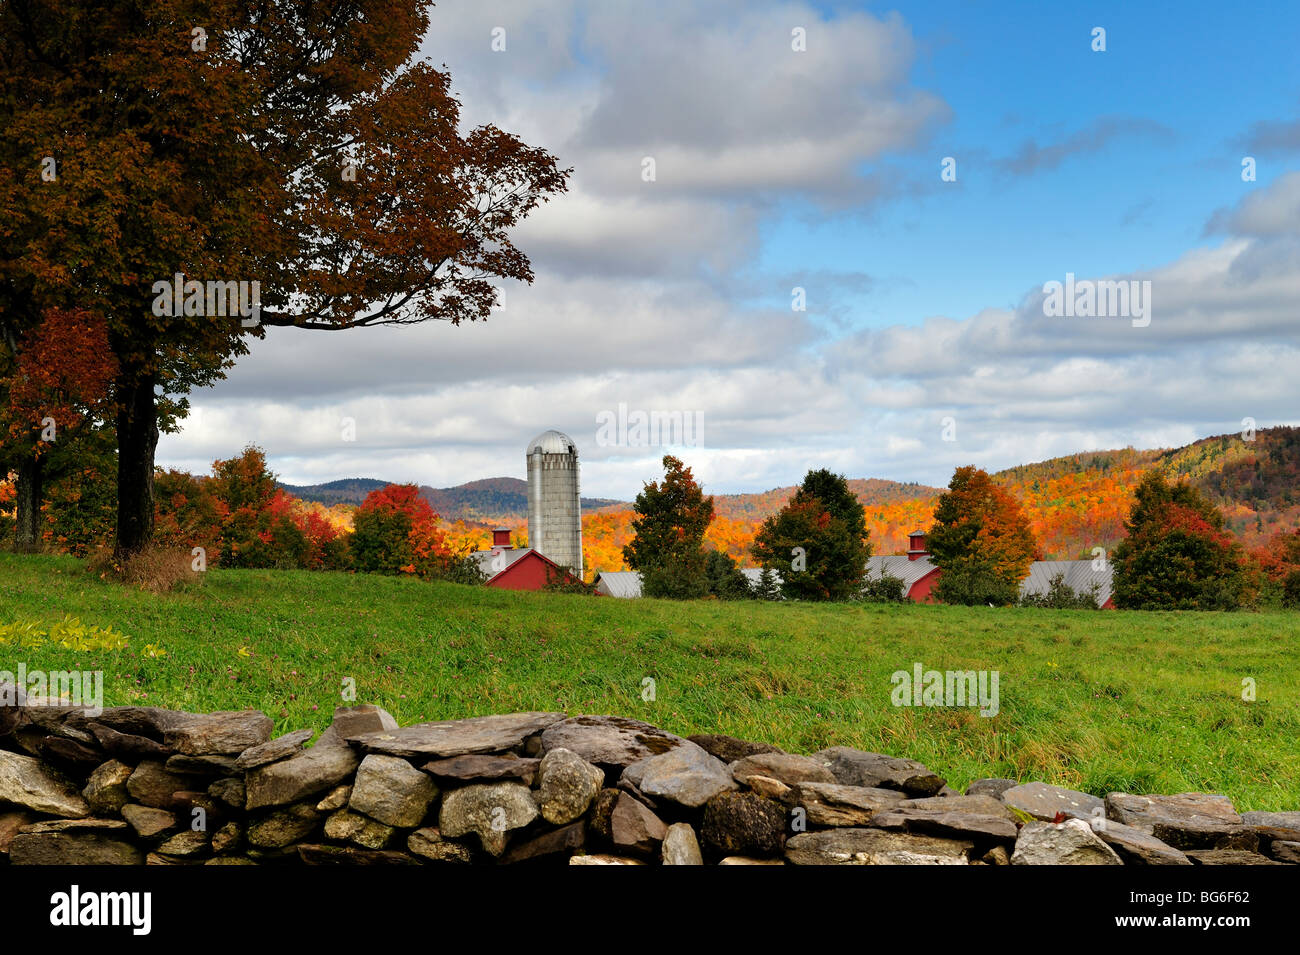 Country farm in the fall. Stock Photo